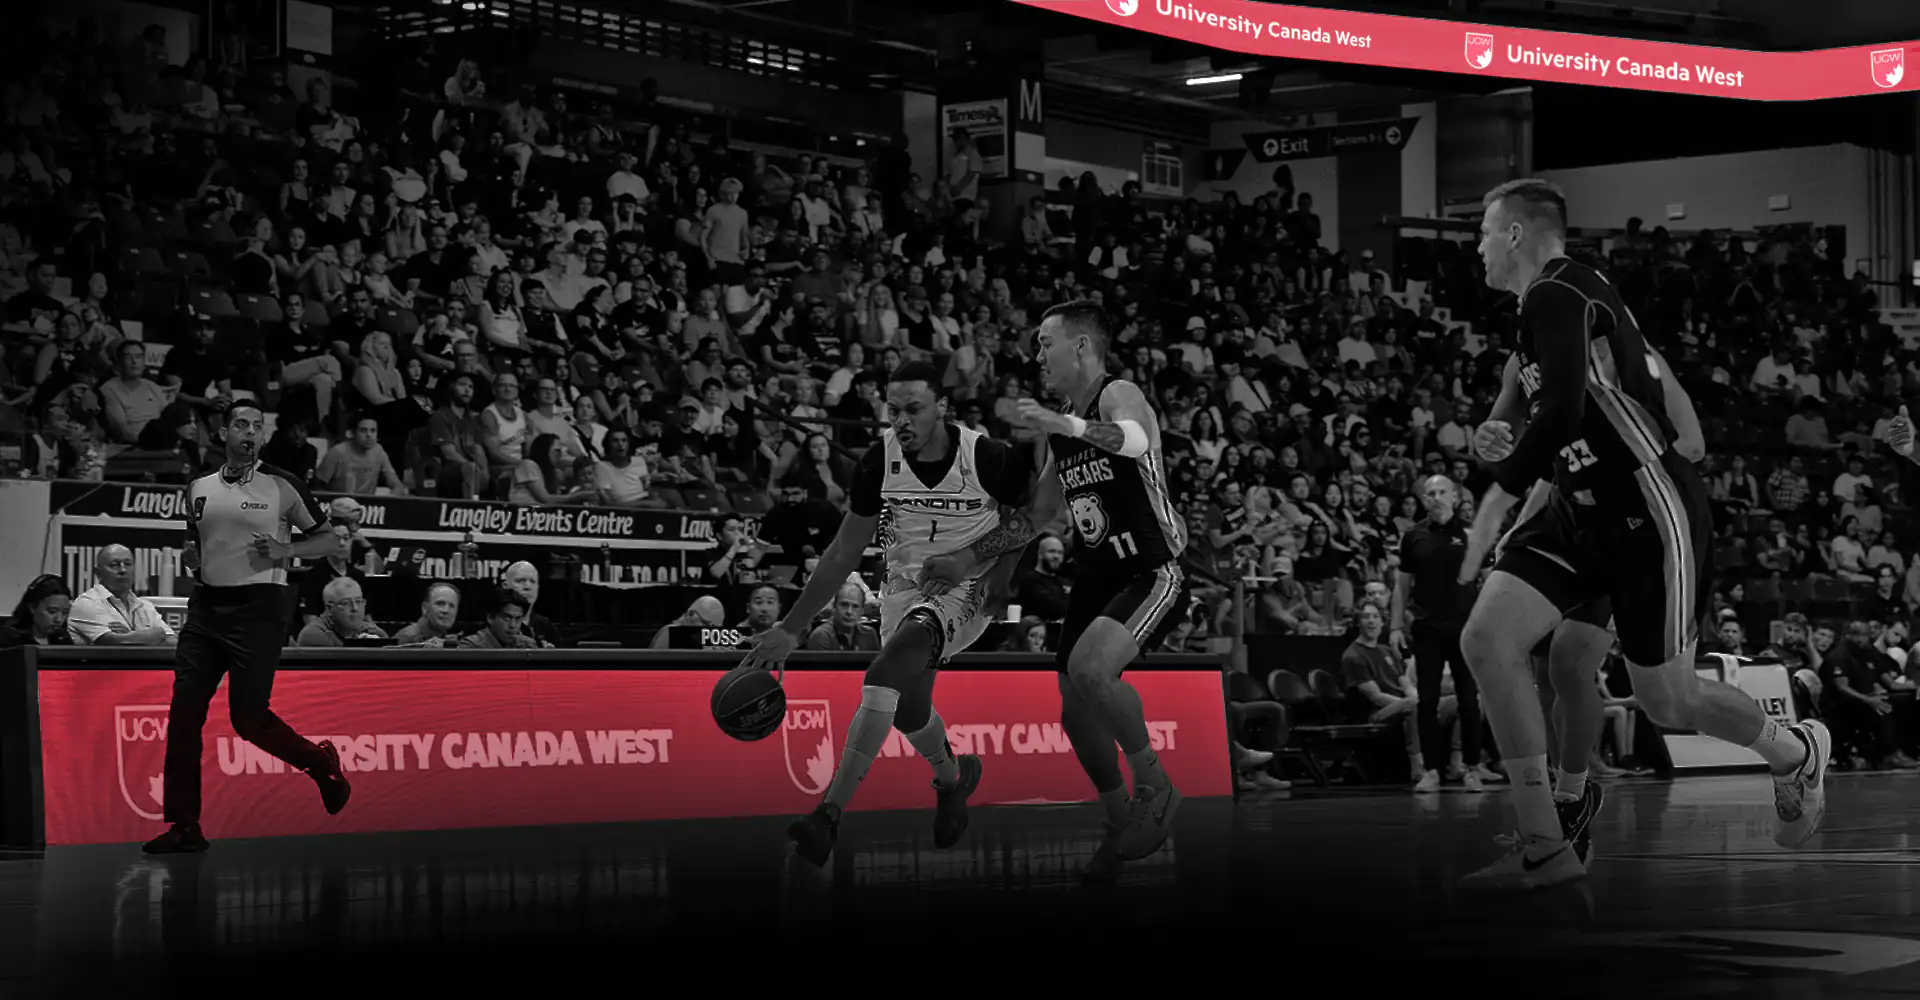  Vancouver Bandits and University Canada West Renew Partnership for the 2024 CEBL Season